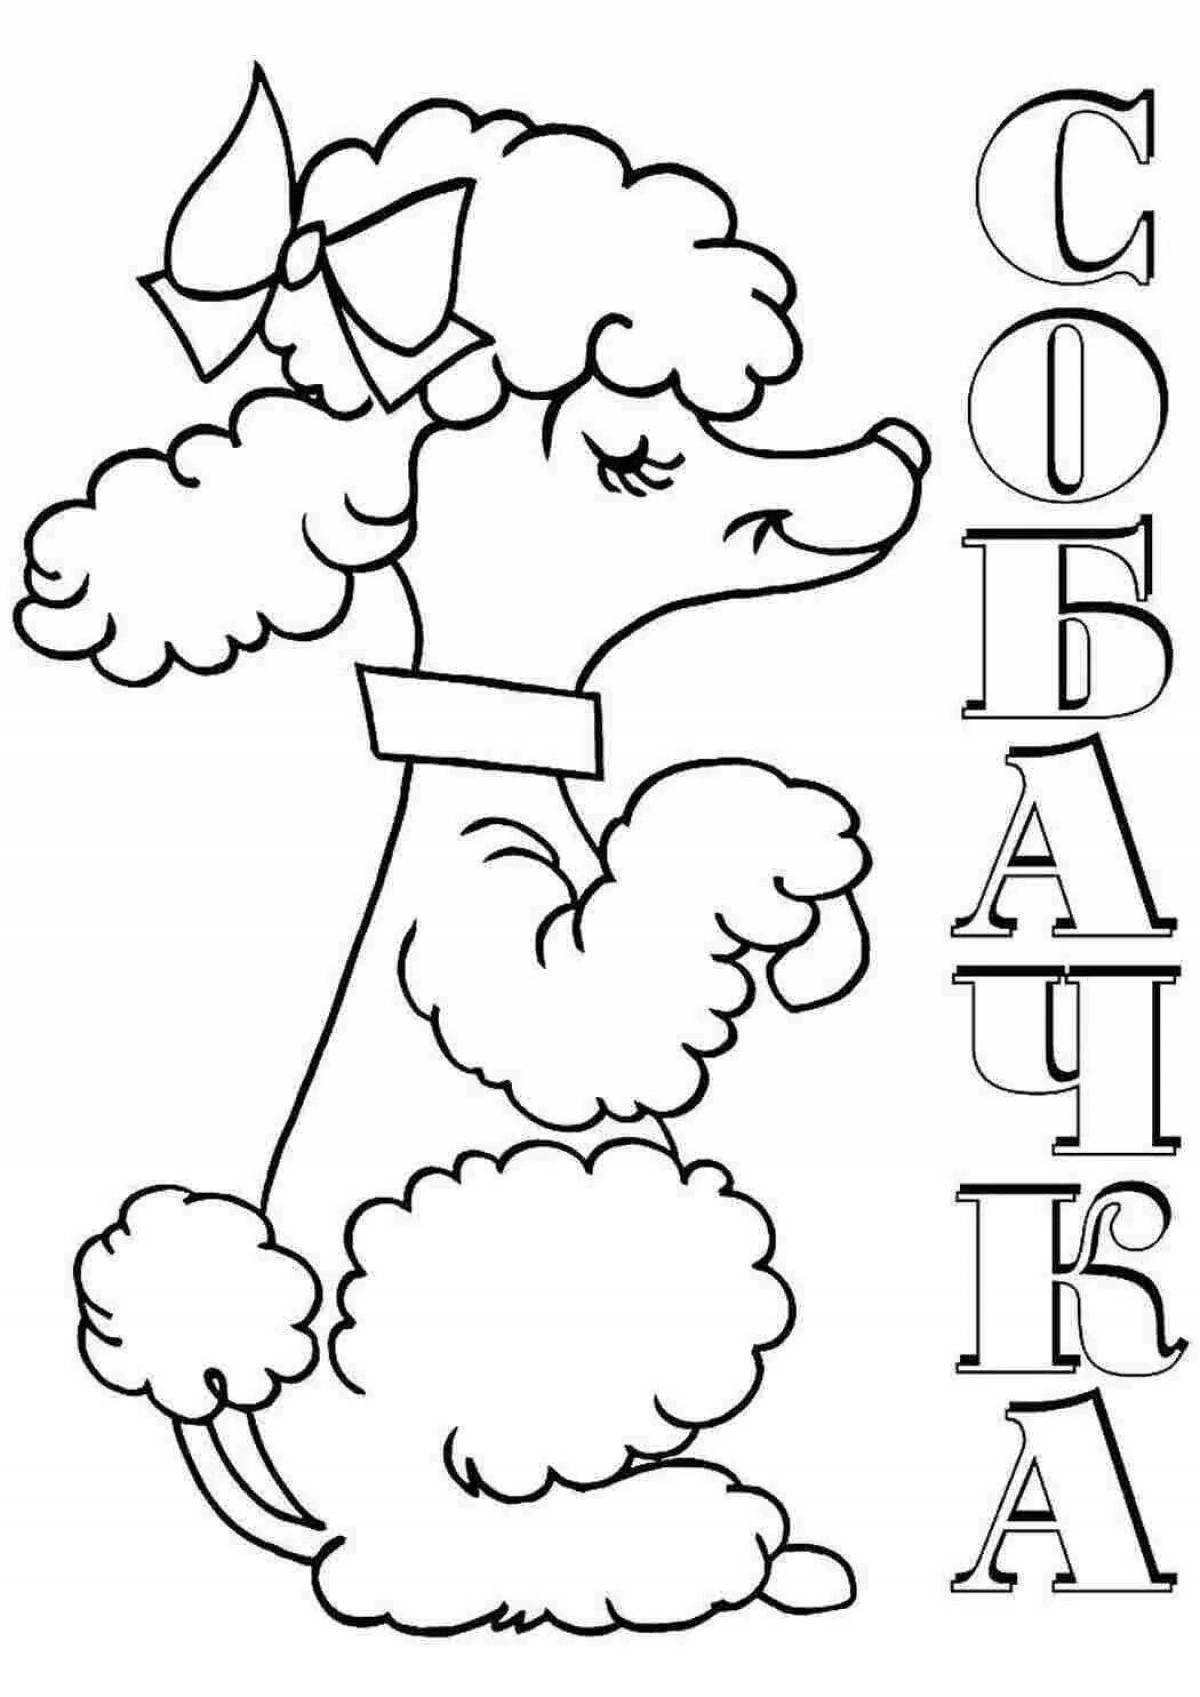 Cute poodle coloring book for kids